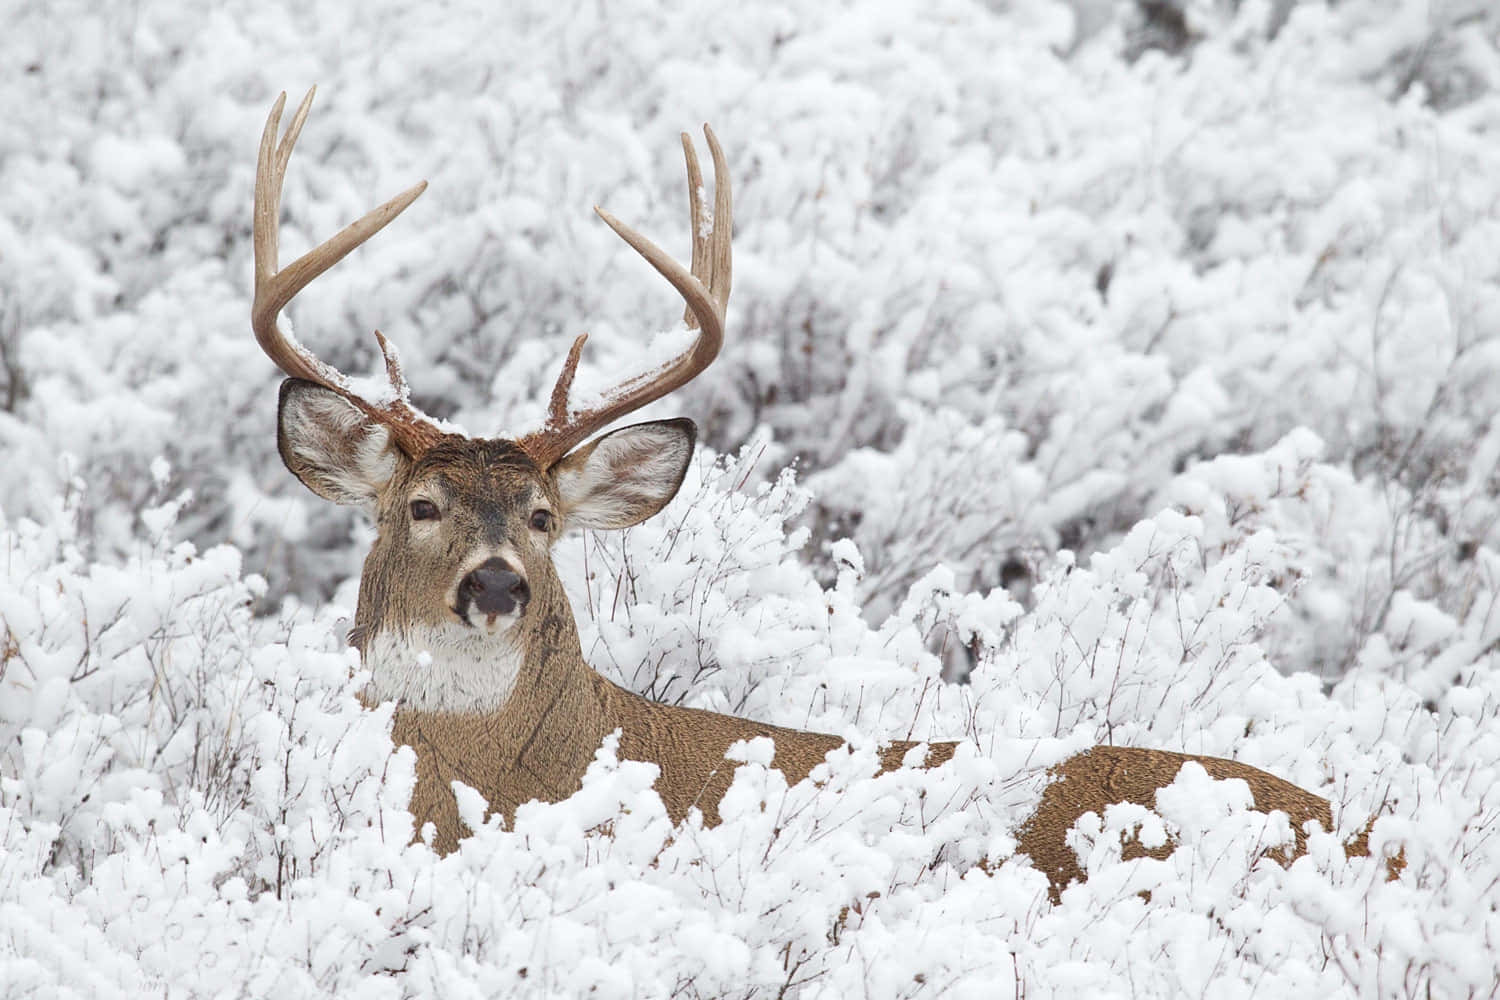 Whitetail Deer On Snow-Covered Field Wallpaper